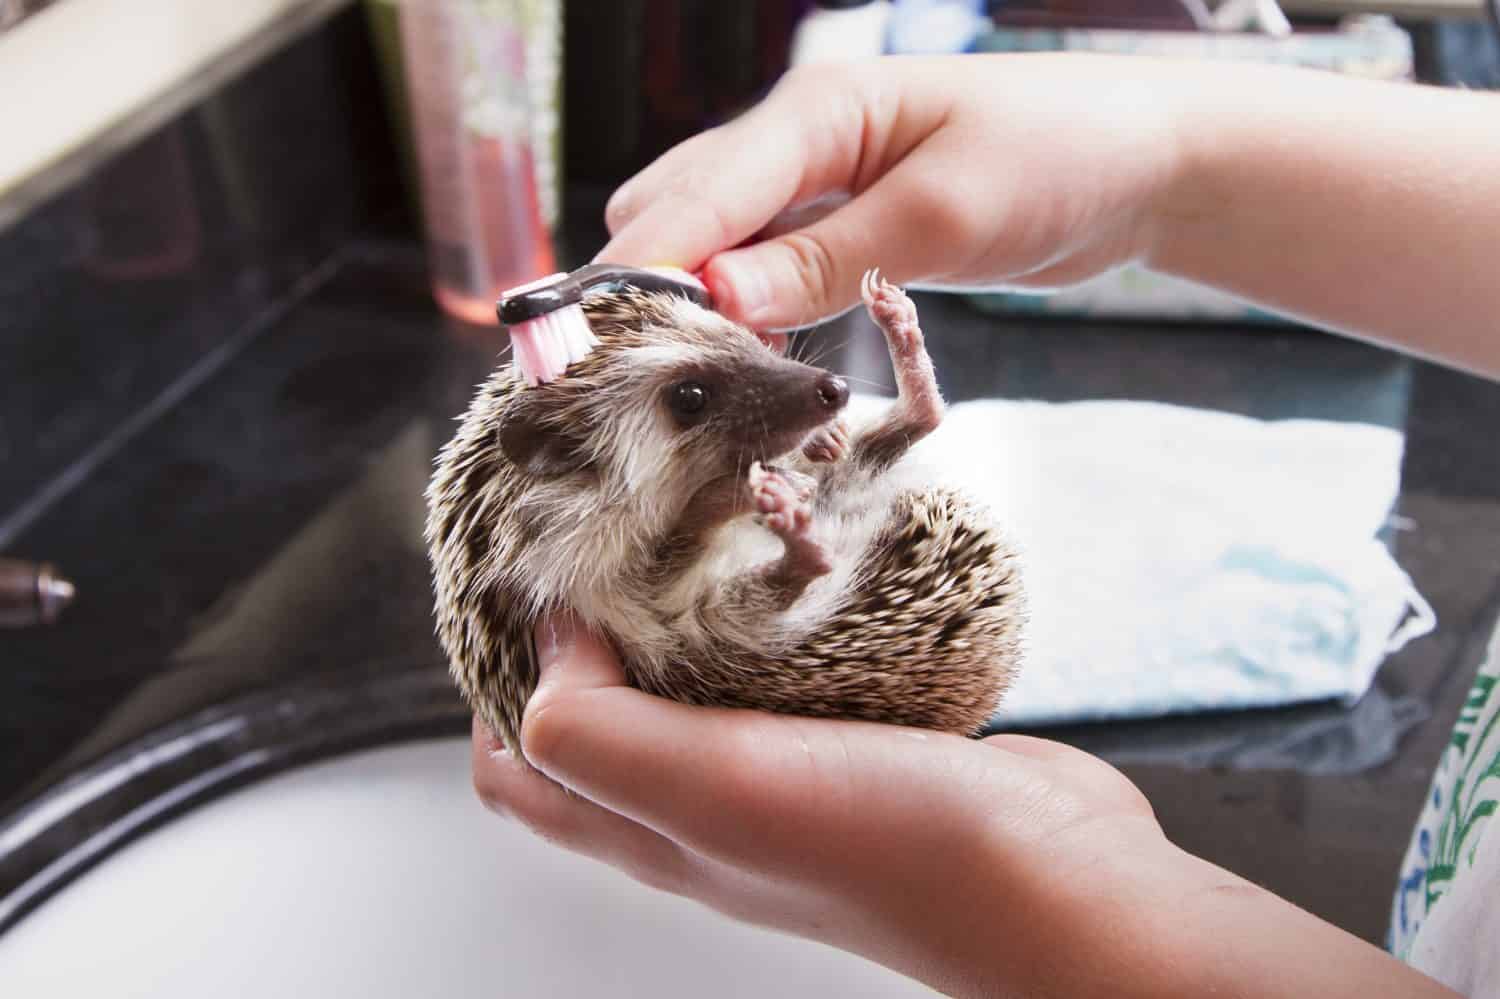 A hedgehog taking a bath, getting scrubbed with a toothbrush